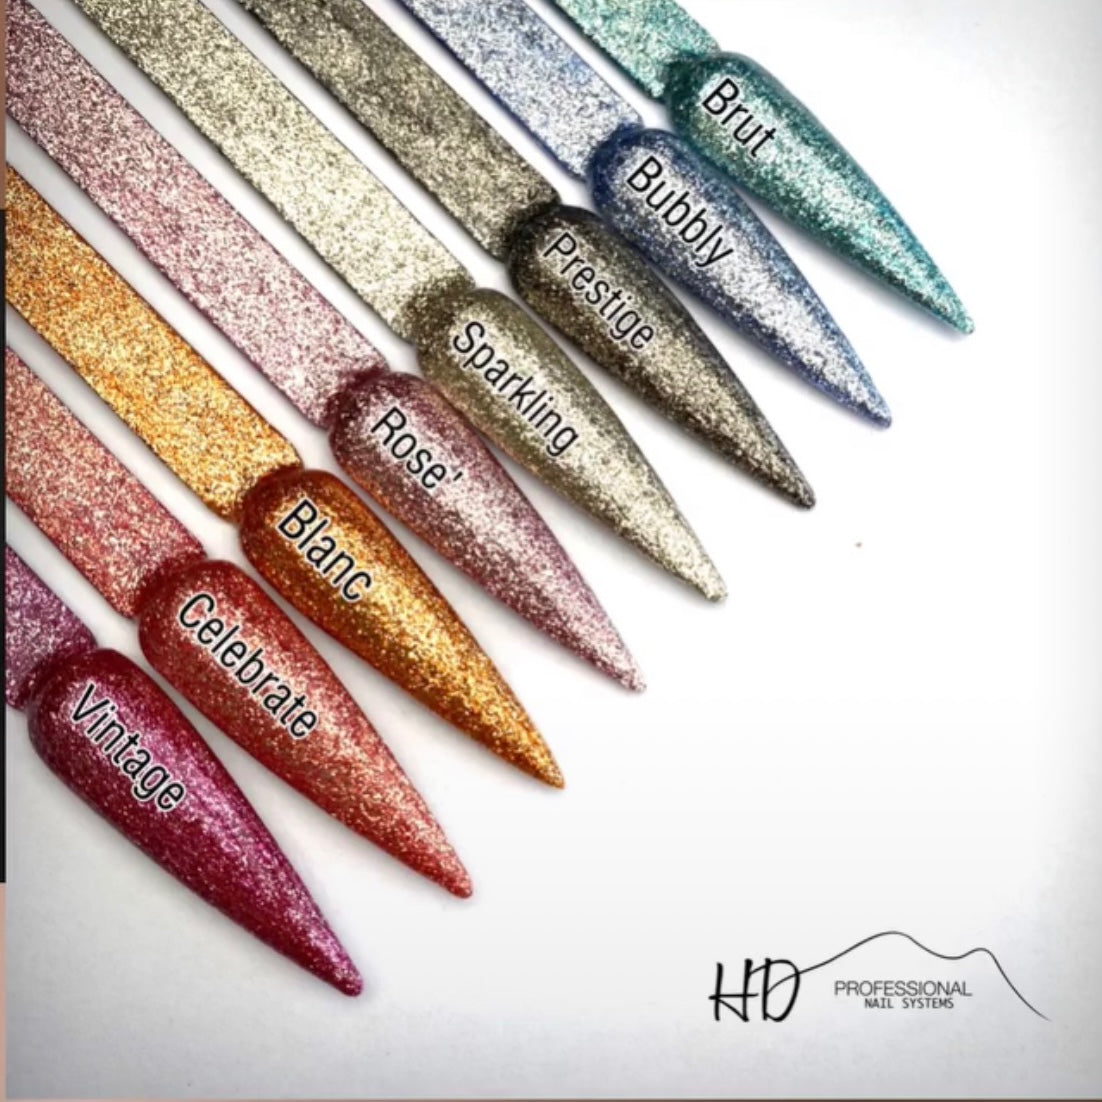 HD Colour It! Champagne Collection (all 8 colors 15ml)